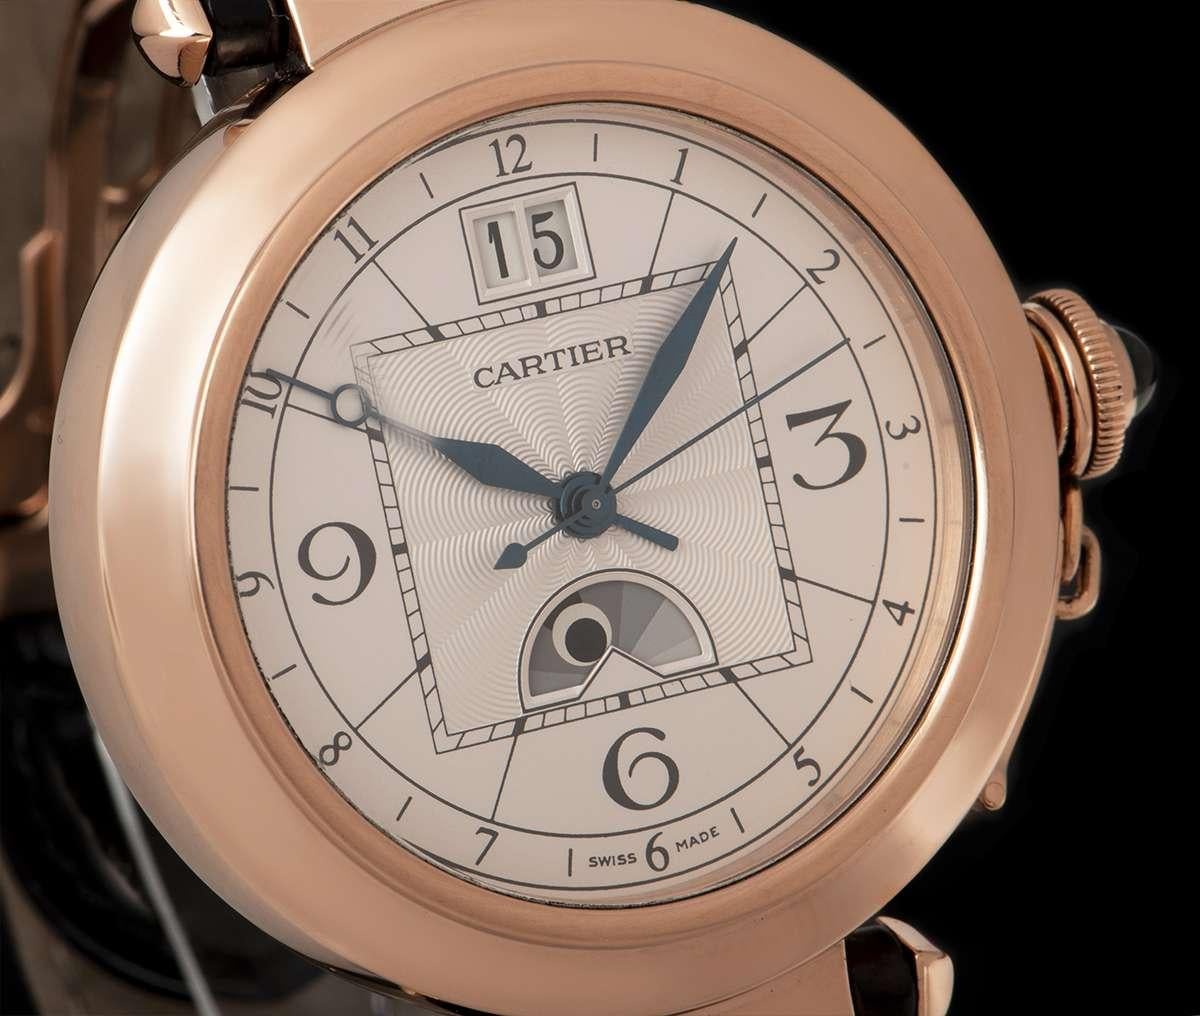 An 18k Rose Gold Pasha de Cartier Gents Wristwatch, silver dial with a guilloche centre, hour markers and arabic numbers 3, 6 and 9, day and night indicator at 6 0'clock, date at 12 0'clock, blued steel hands, a fixed 18k rose gold bezel, an 18k